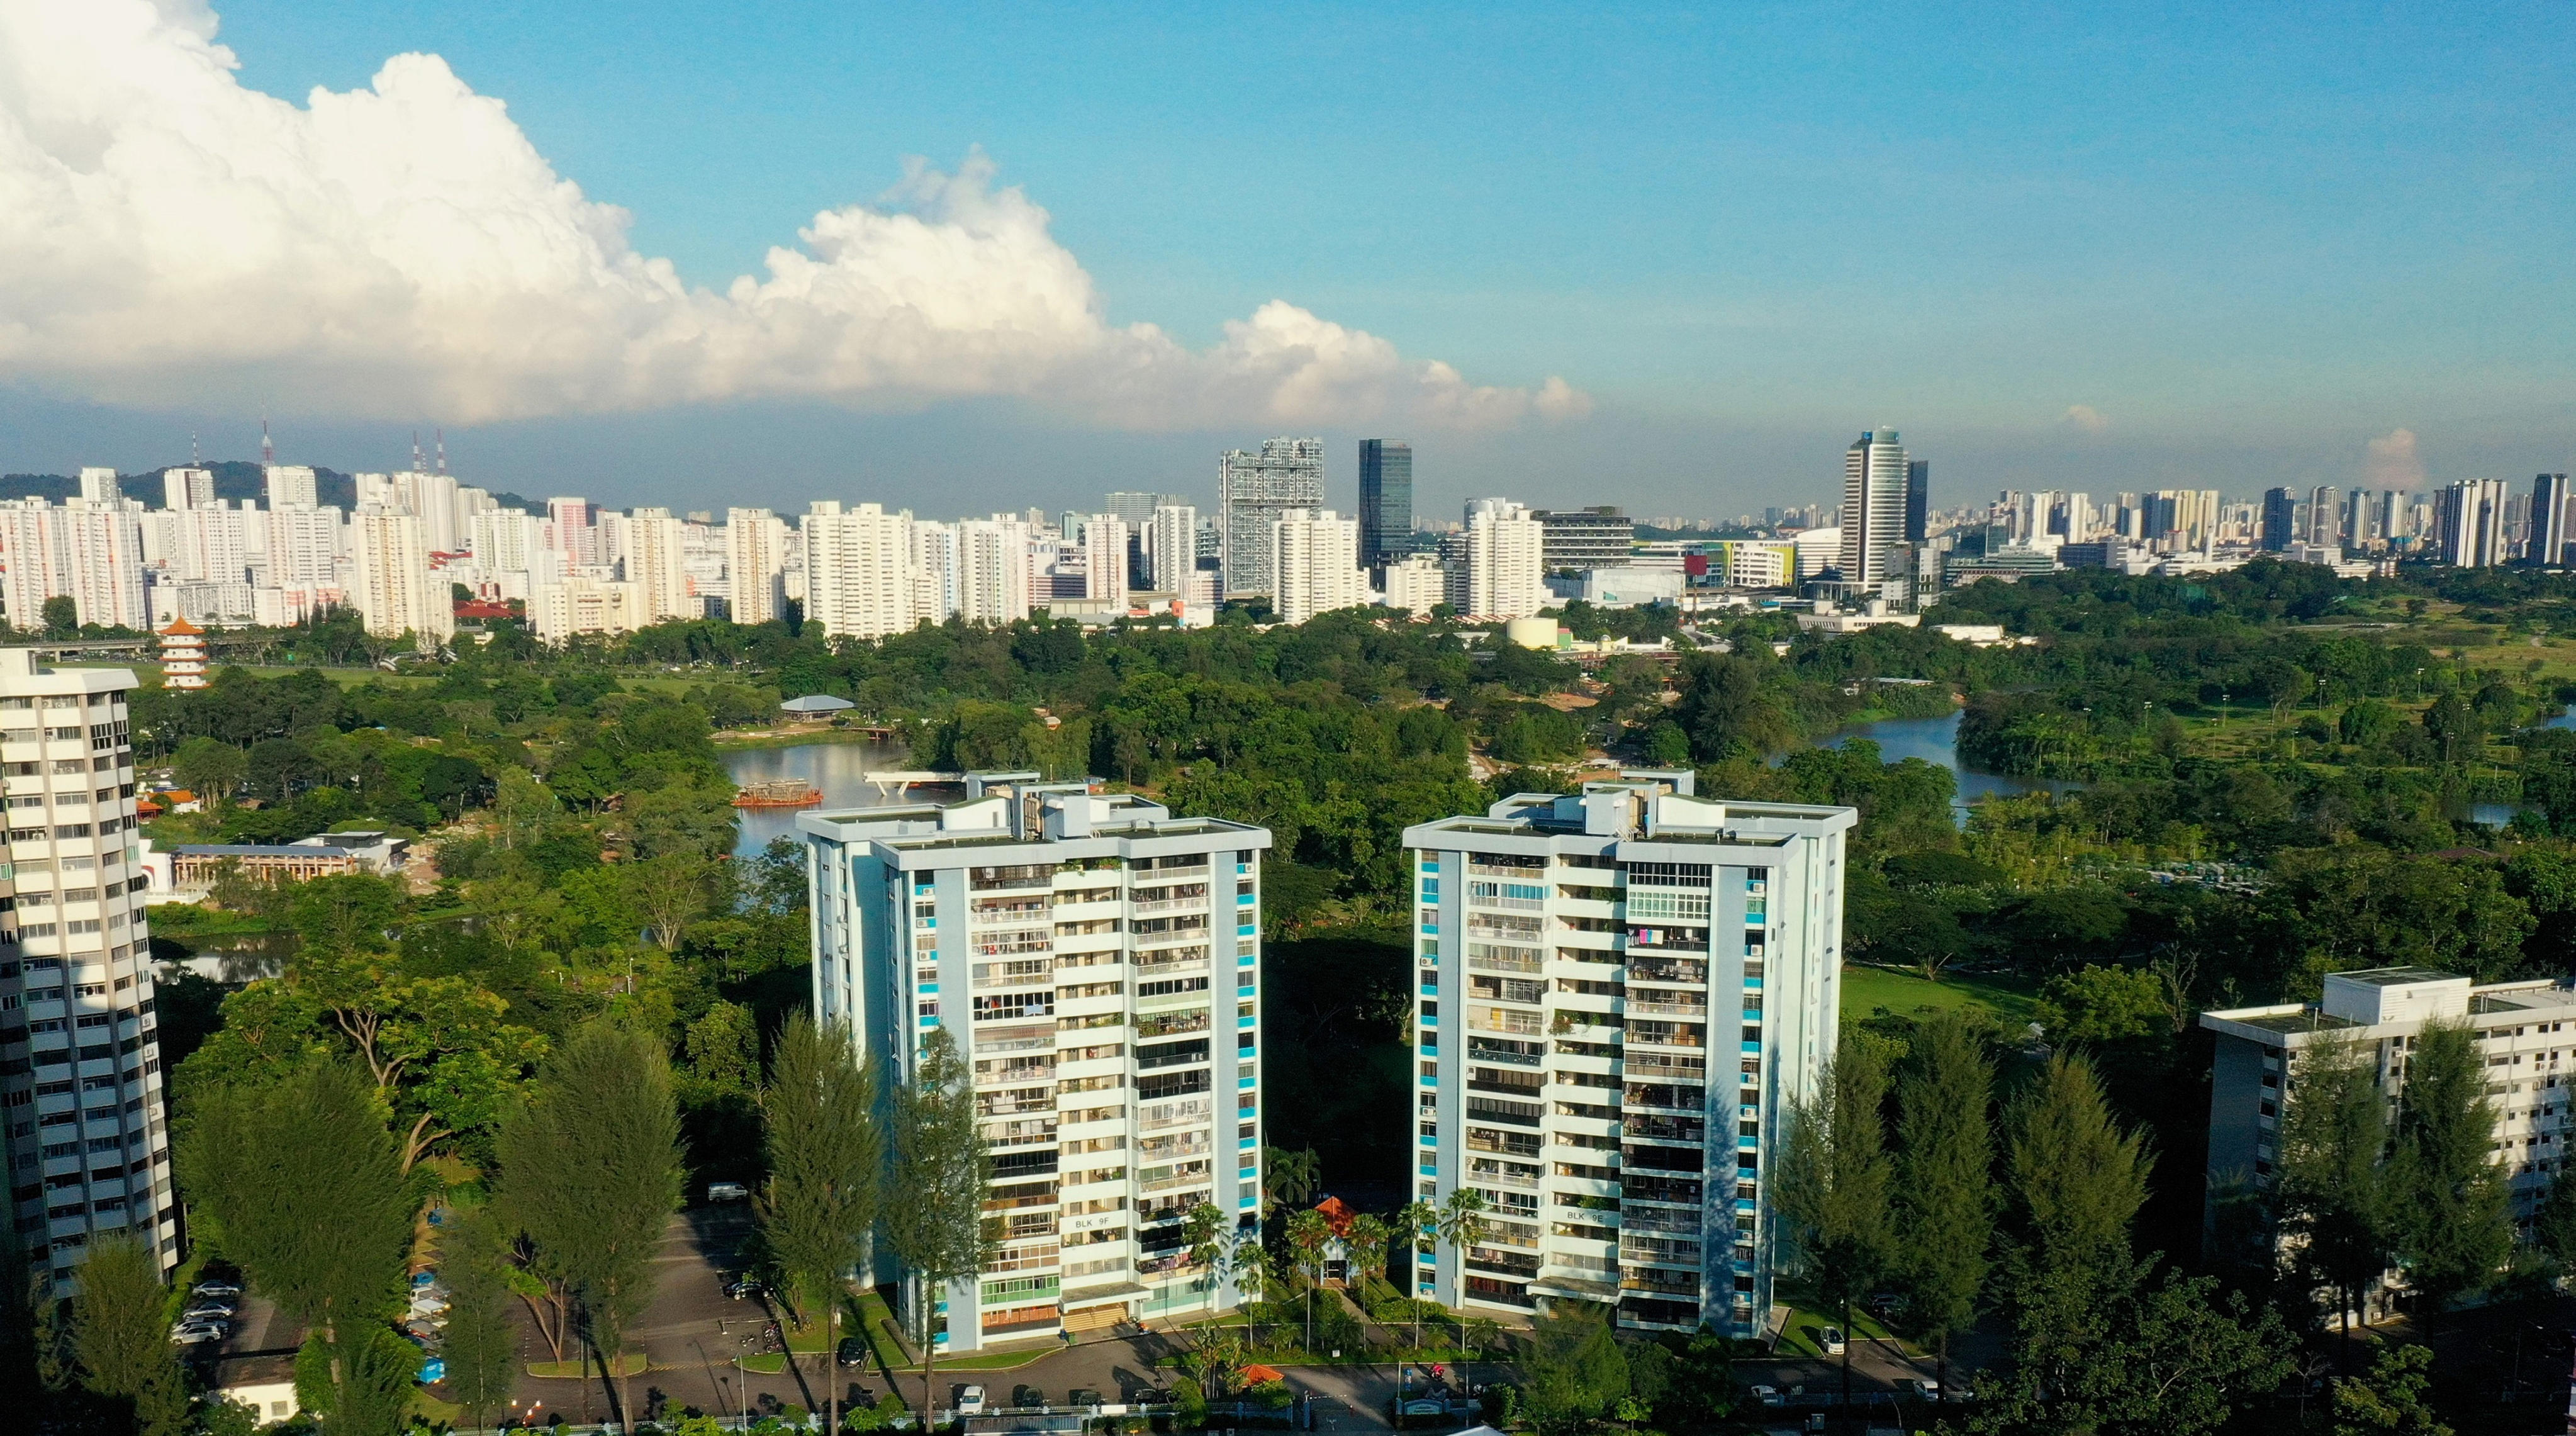 Wing Tai Holdings won the tender for the collective purchase of Lakeside Apartments in Singapore for S$274 million. Photo: Handout